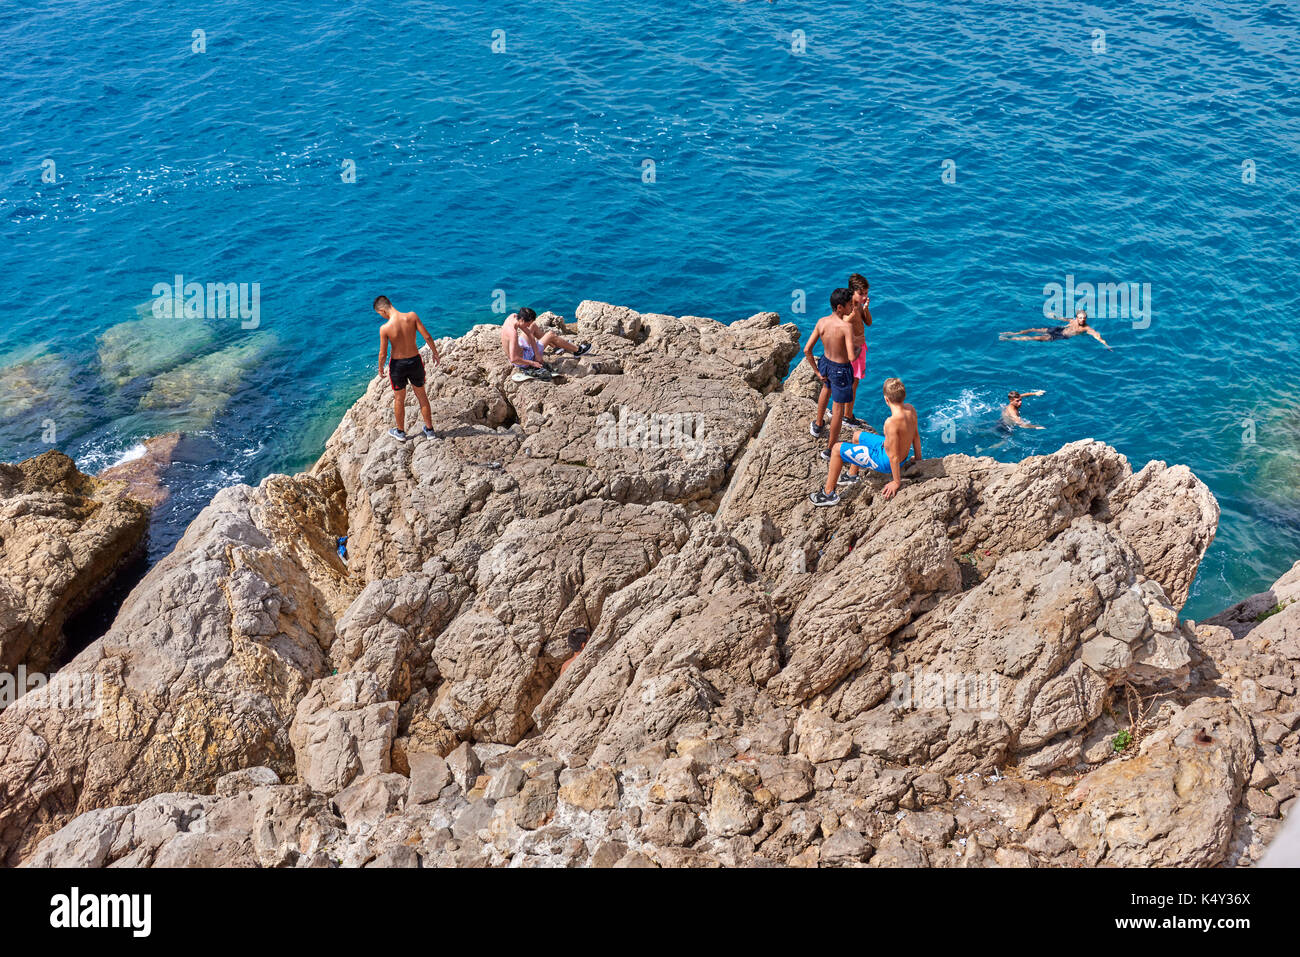 france photography Southeast corner of hi-res images and Alamy - stock